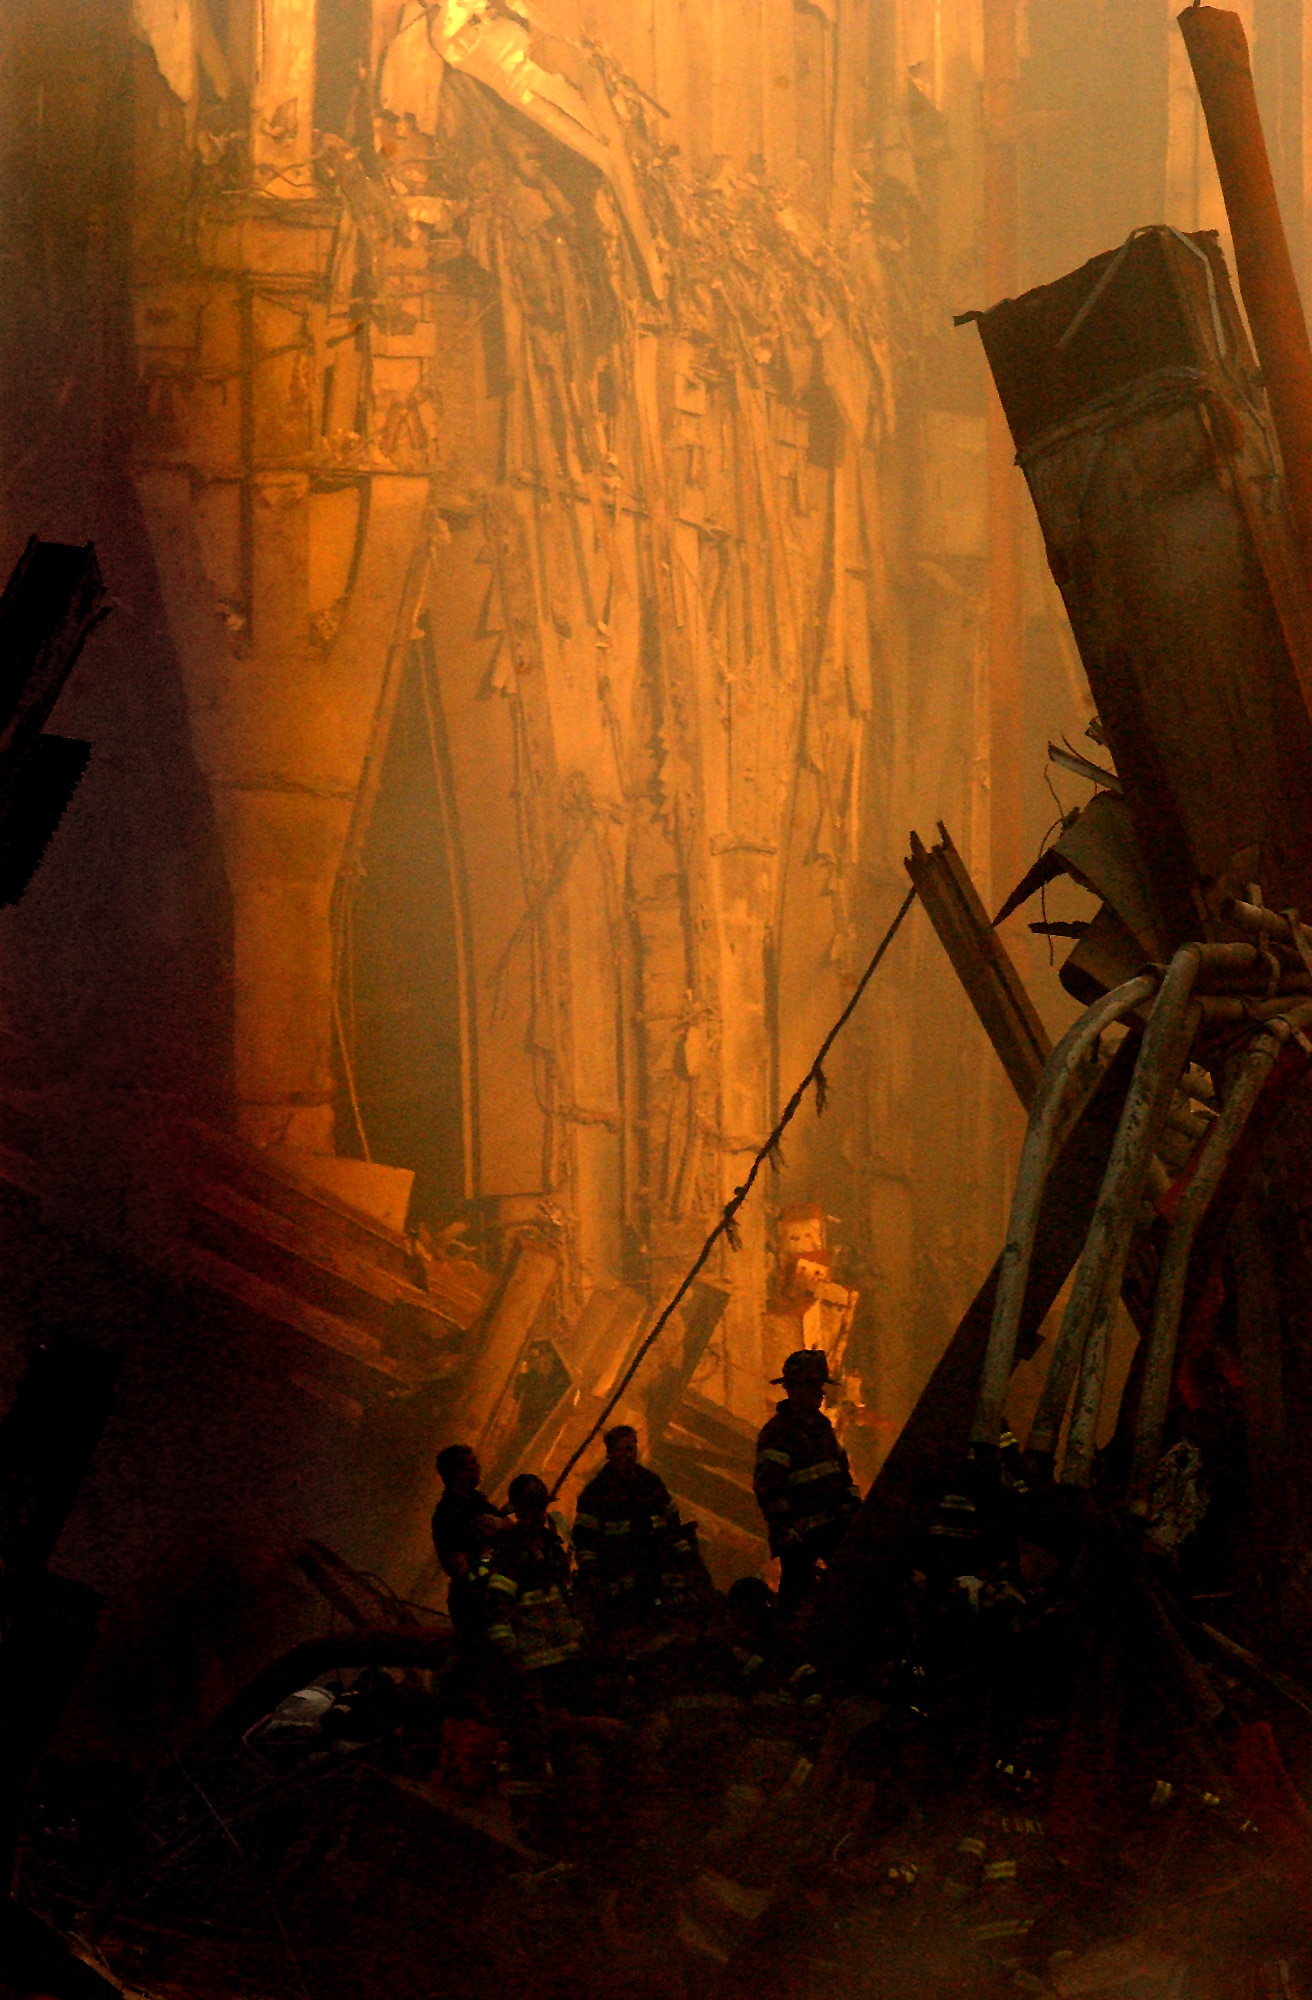 Rescue workers conduct search and rescue attempts, descending deep into the rubble of the World Trade Center. (U.S. Navy Photo/Photographer's Mate 2nd Class Jim Watson)